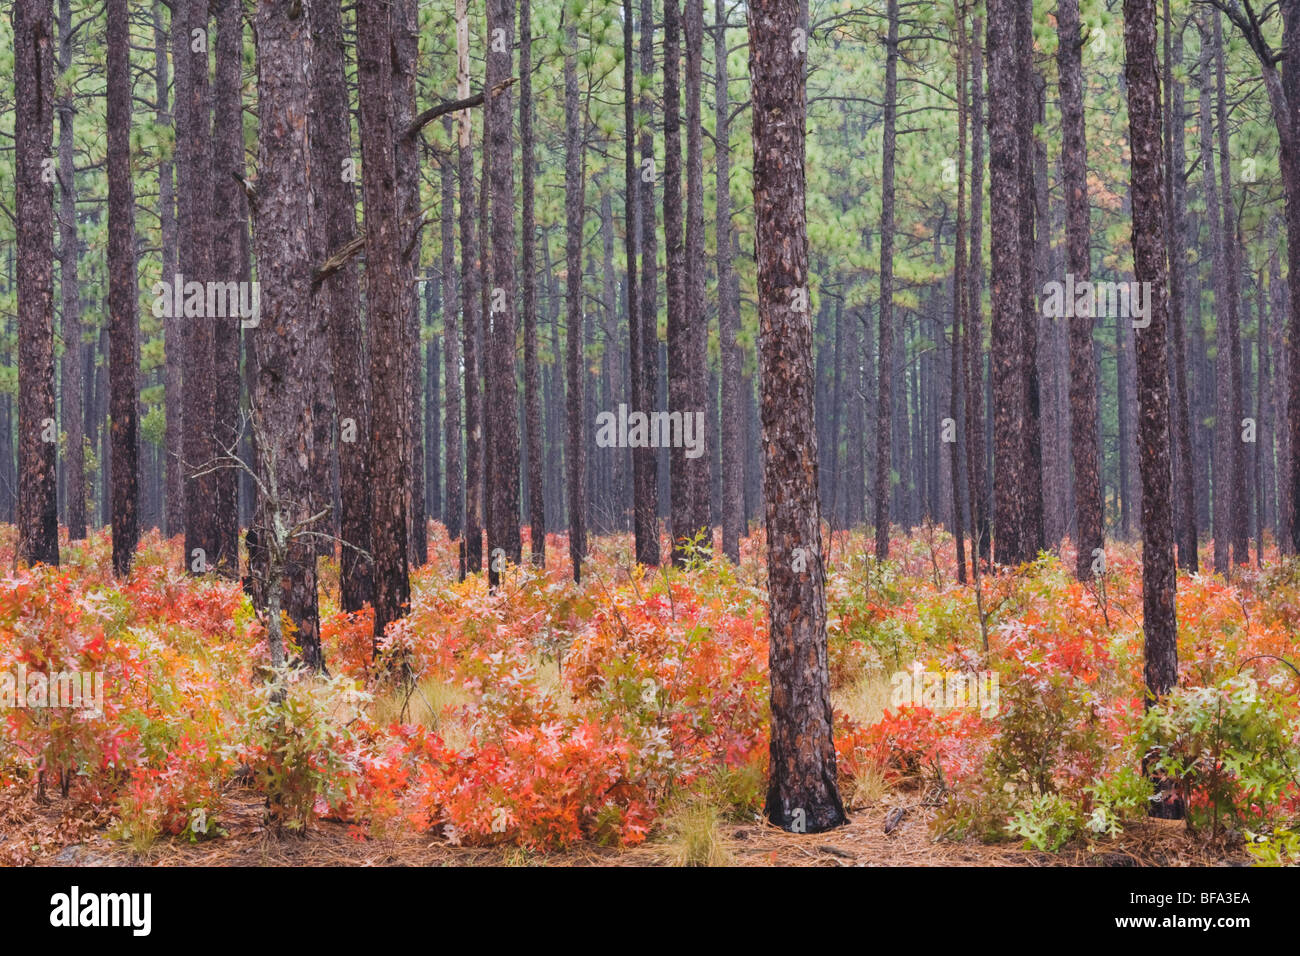 Scarlet Oak and Longleaf Pine, fall colors, Weymouth Woods Sandhills Nature Preserve, Southern Pines, North Carolina, USA Stock Photo